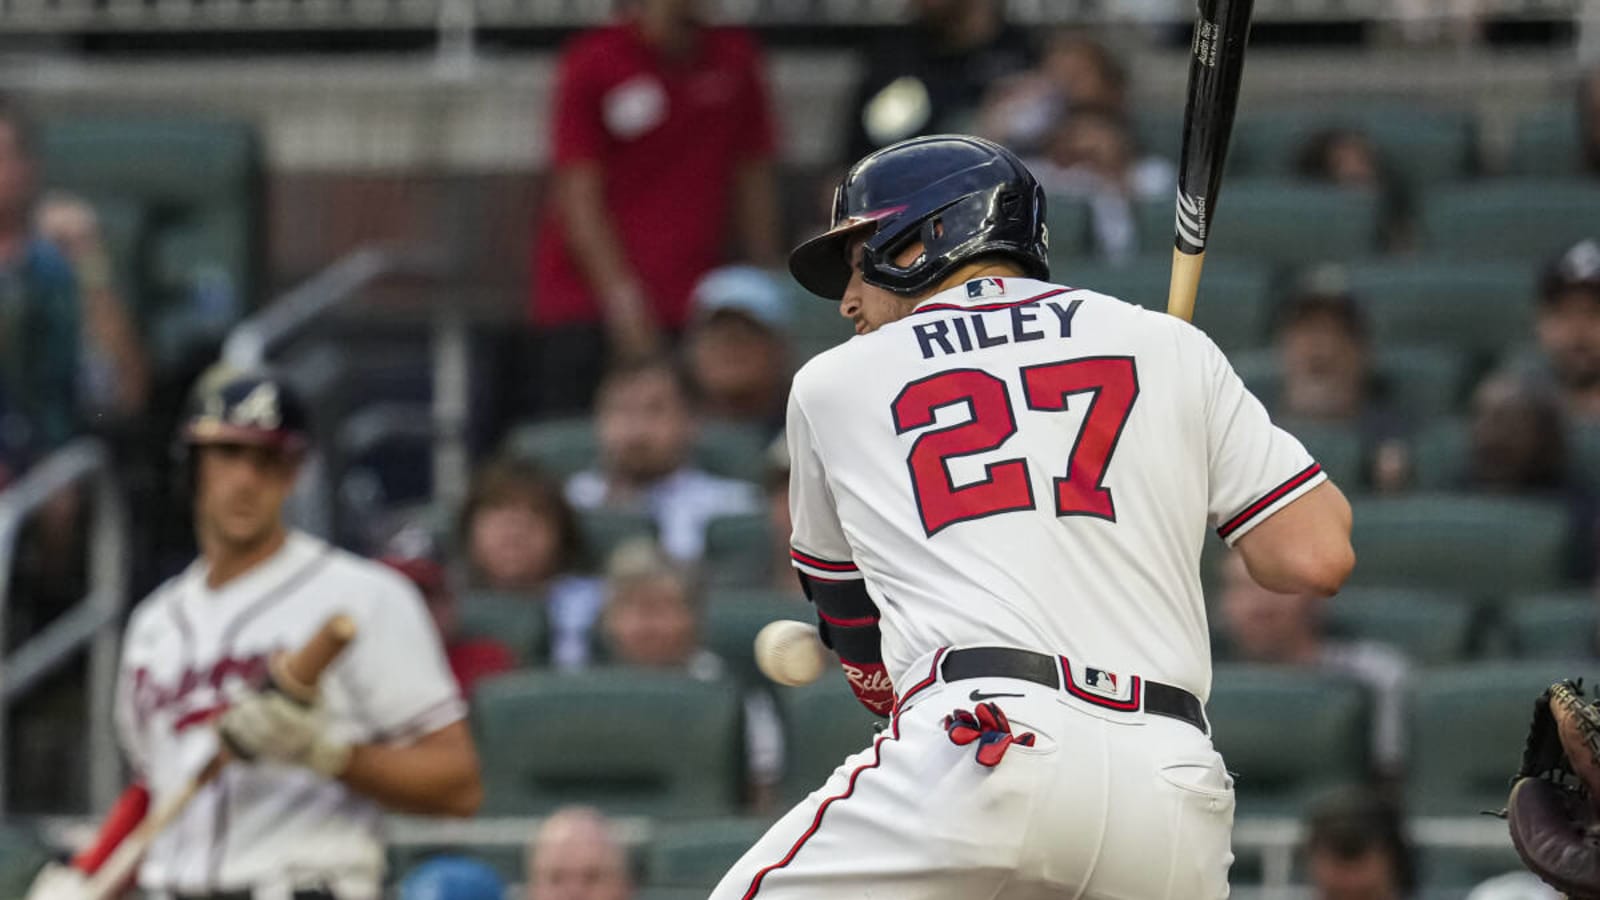 Watch: Austin Riley hits inside-the-park home run against Philadelphia in the first inning